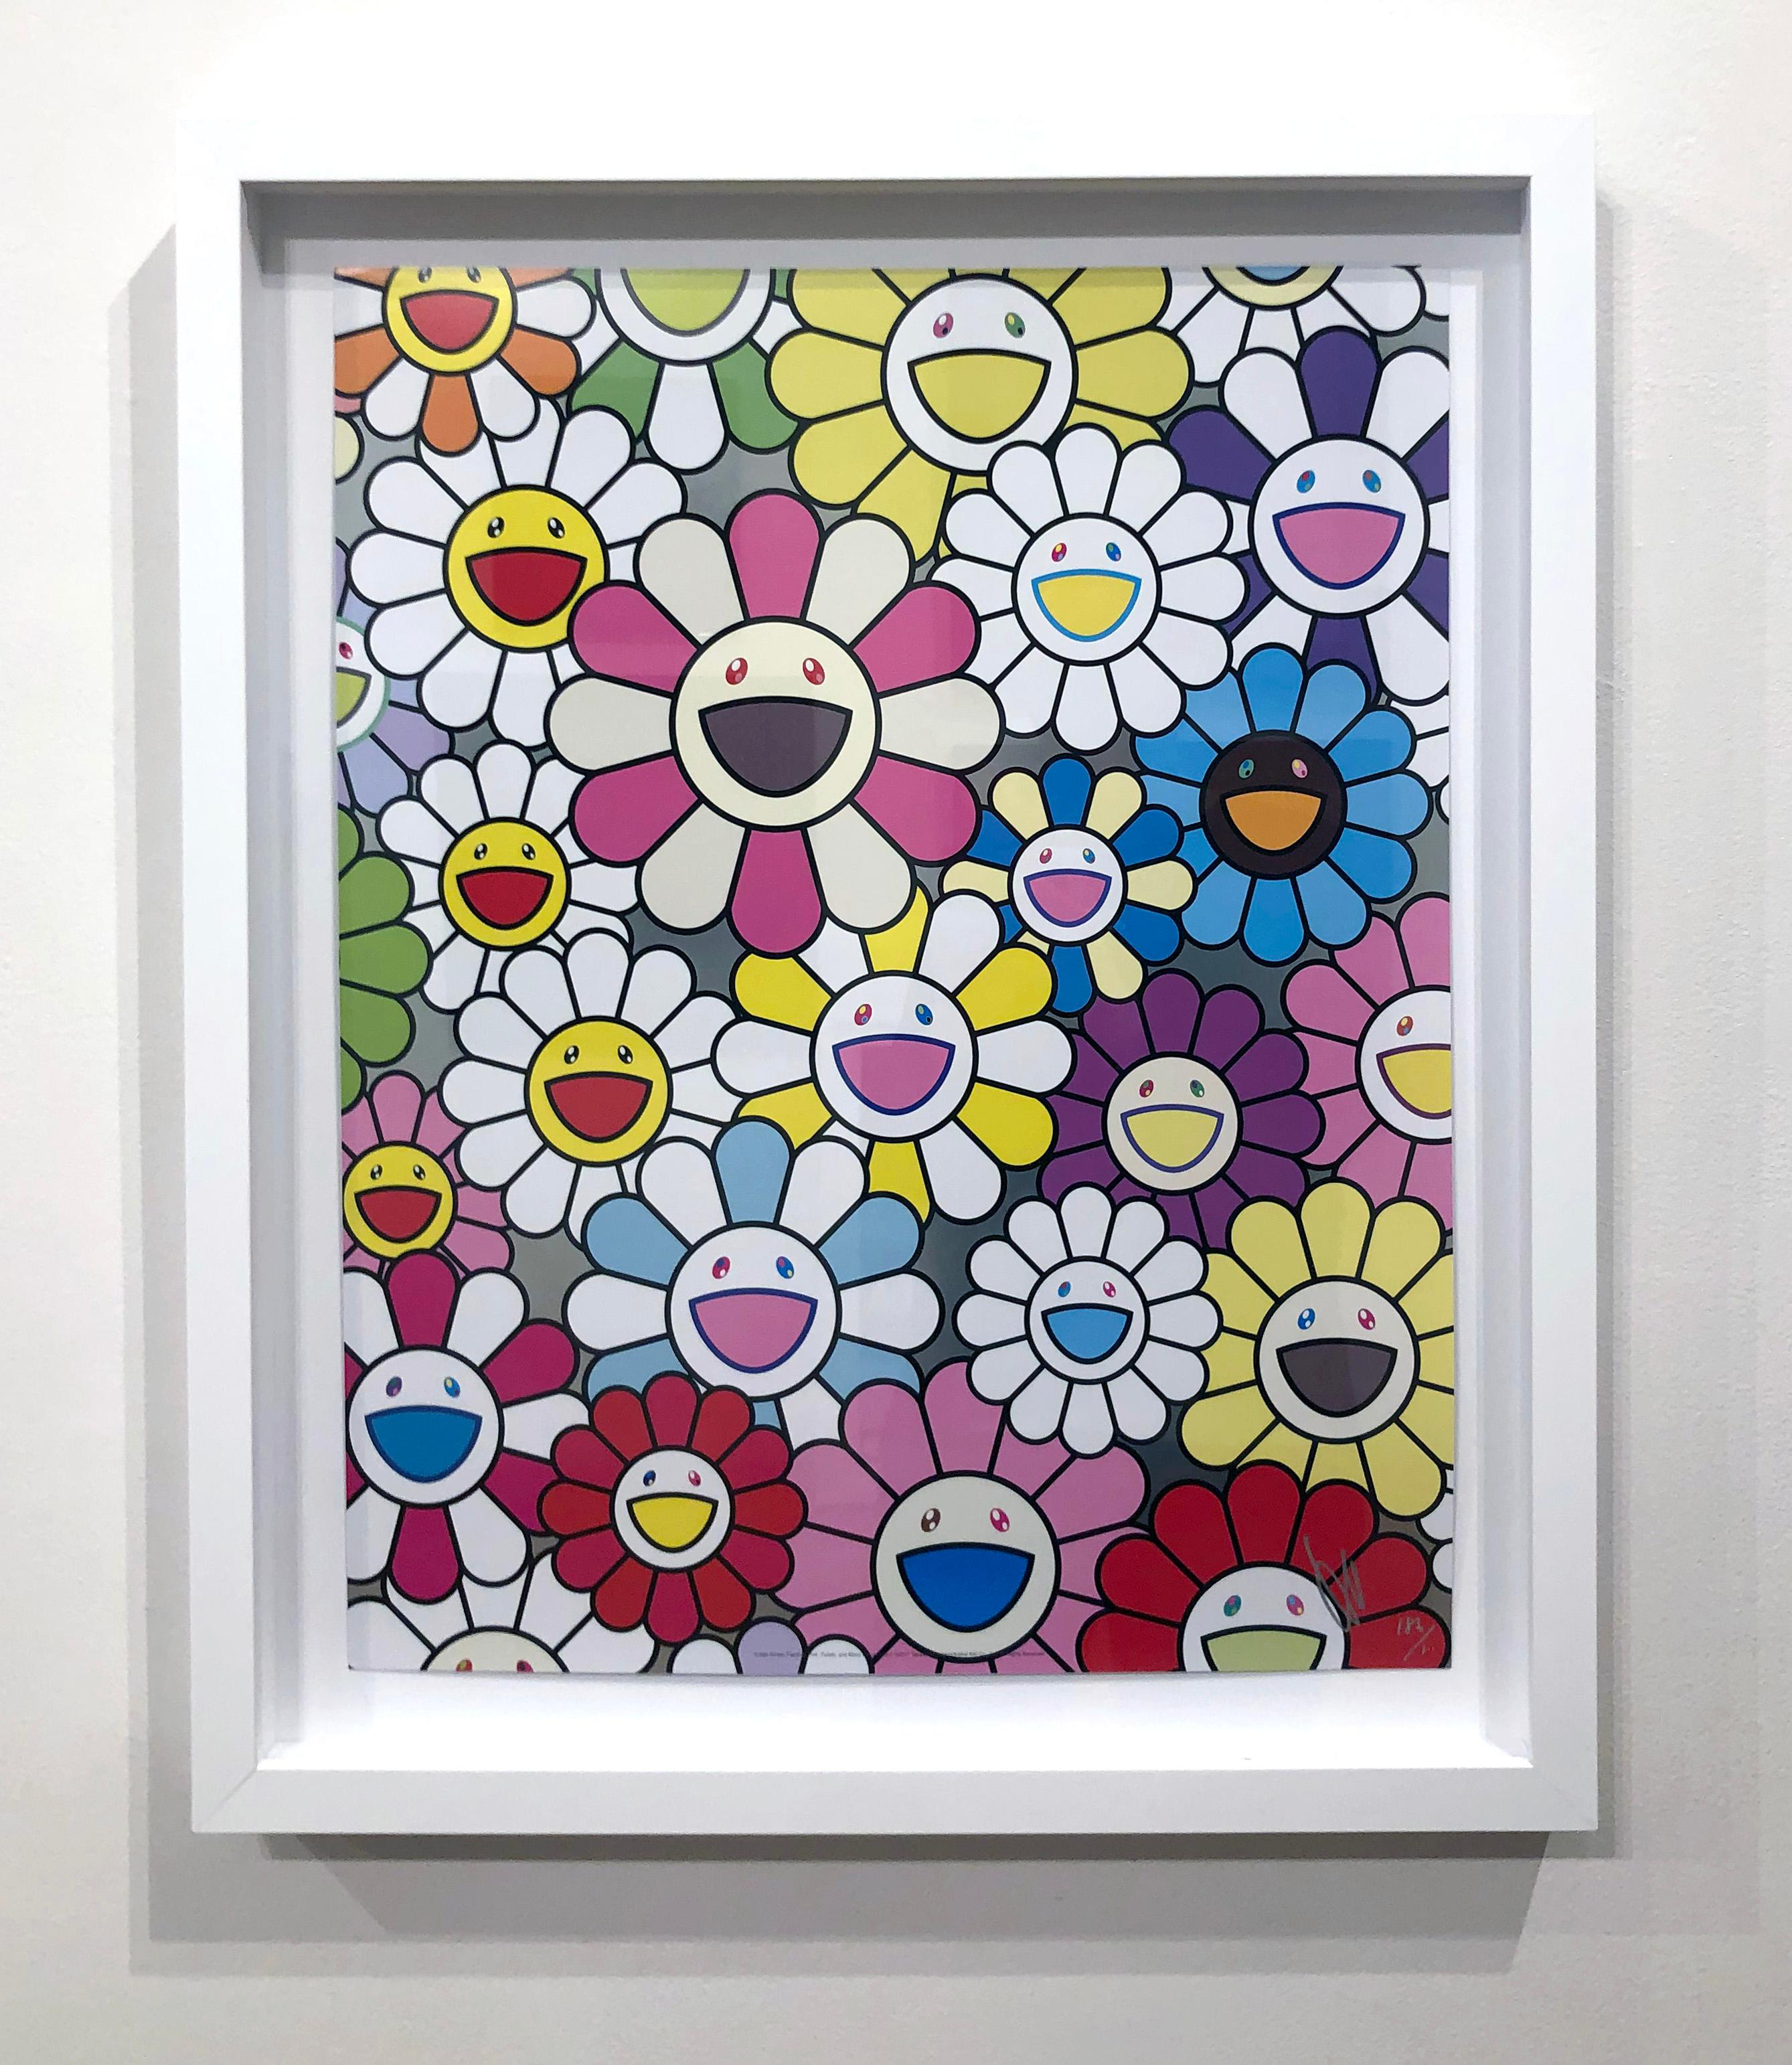 A little Flower Painting: Pink, Purple, and Many Other Colors - Contemporary Print by Takashi Murakami